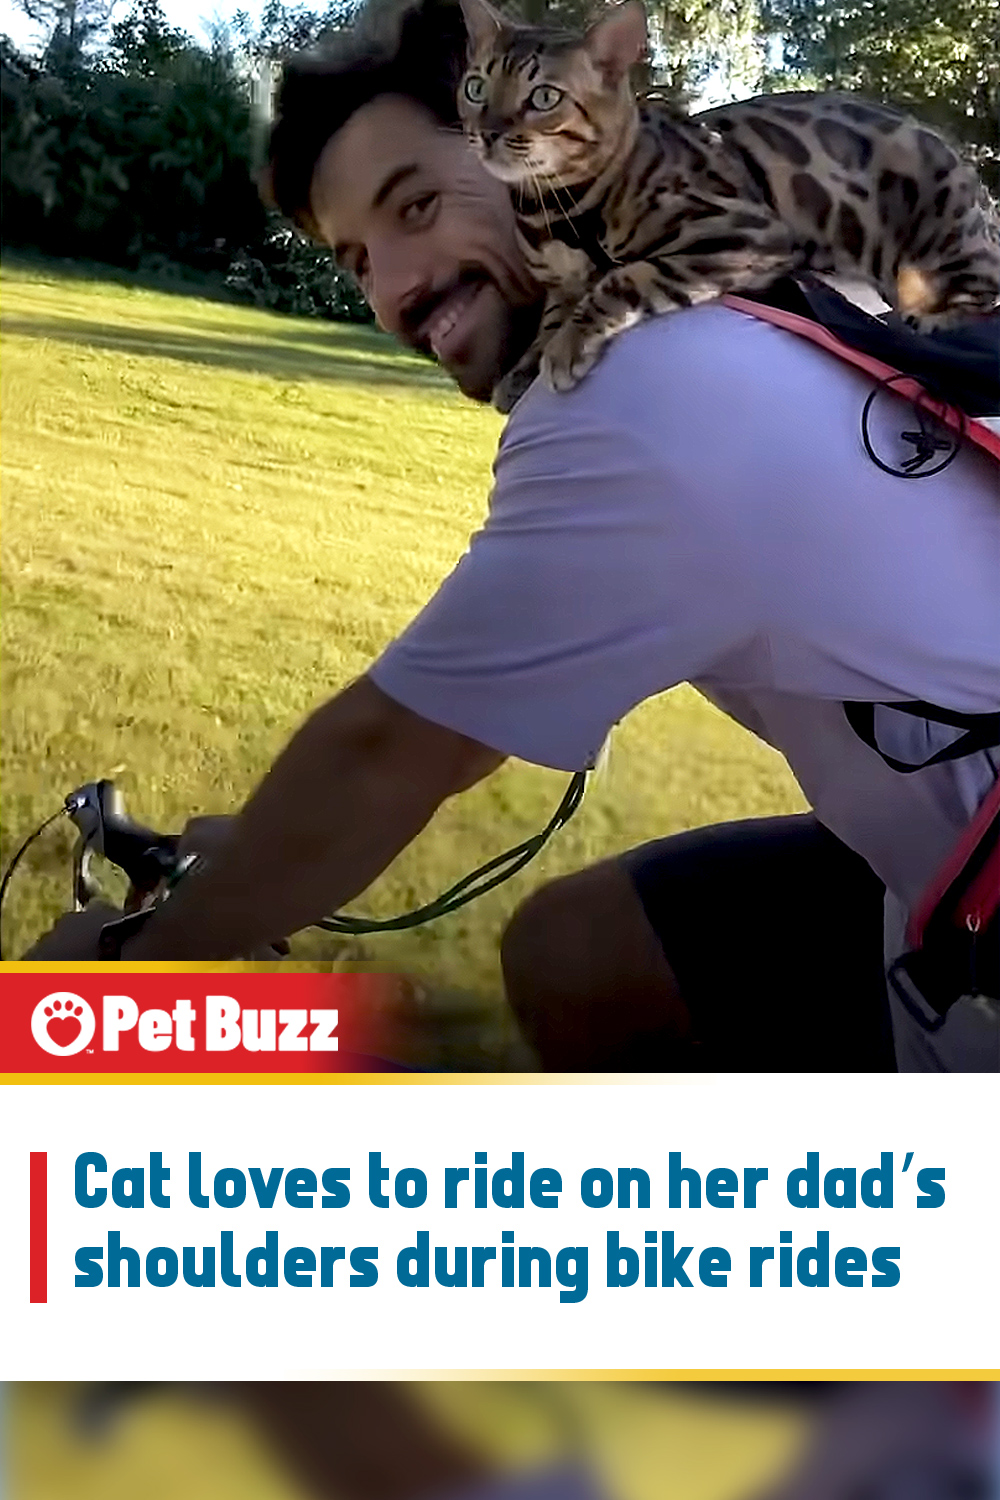 Cat loves to ride on her dad’s shoulders during bike rides